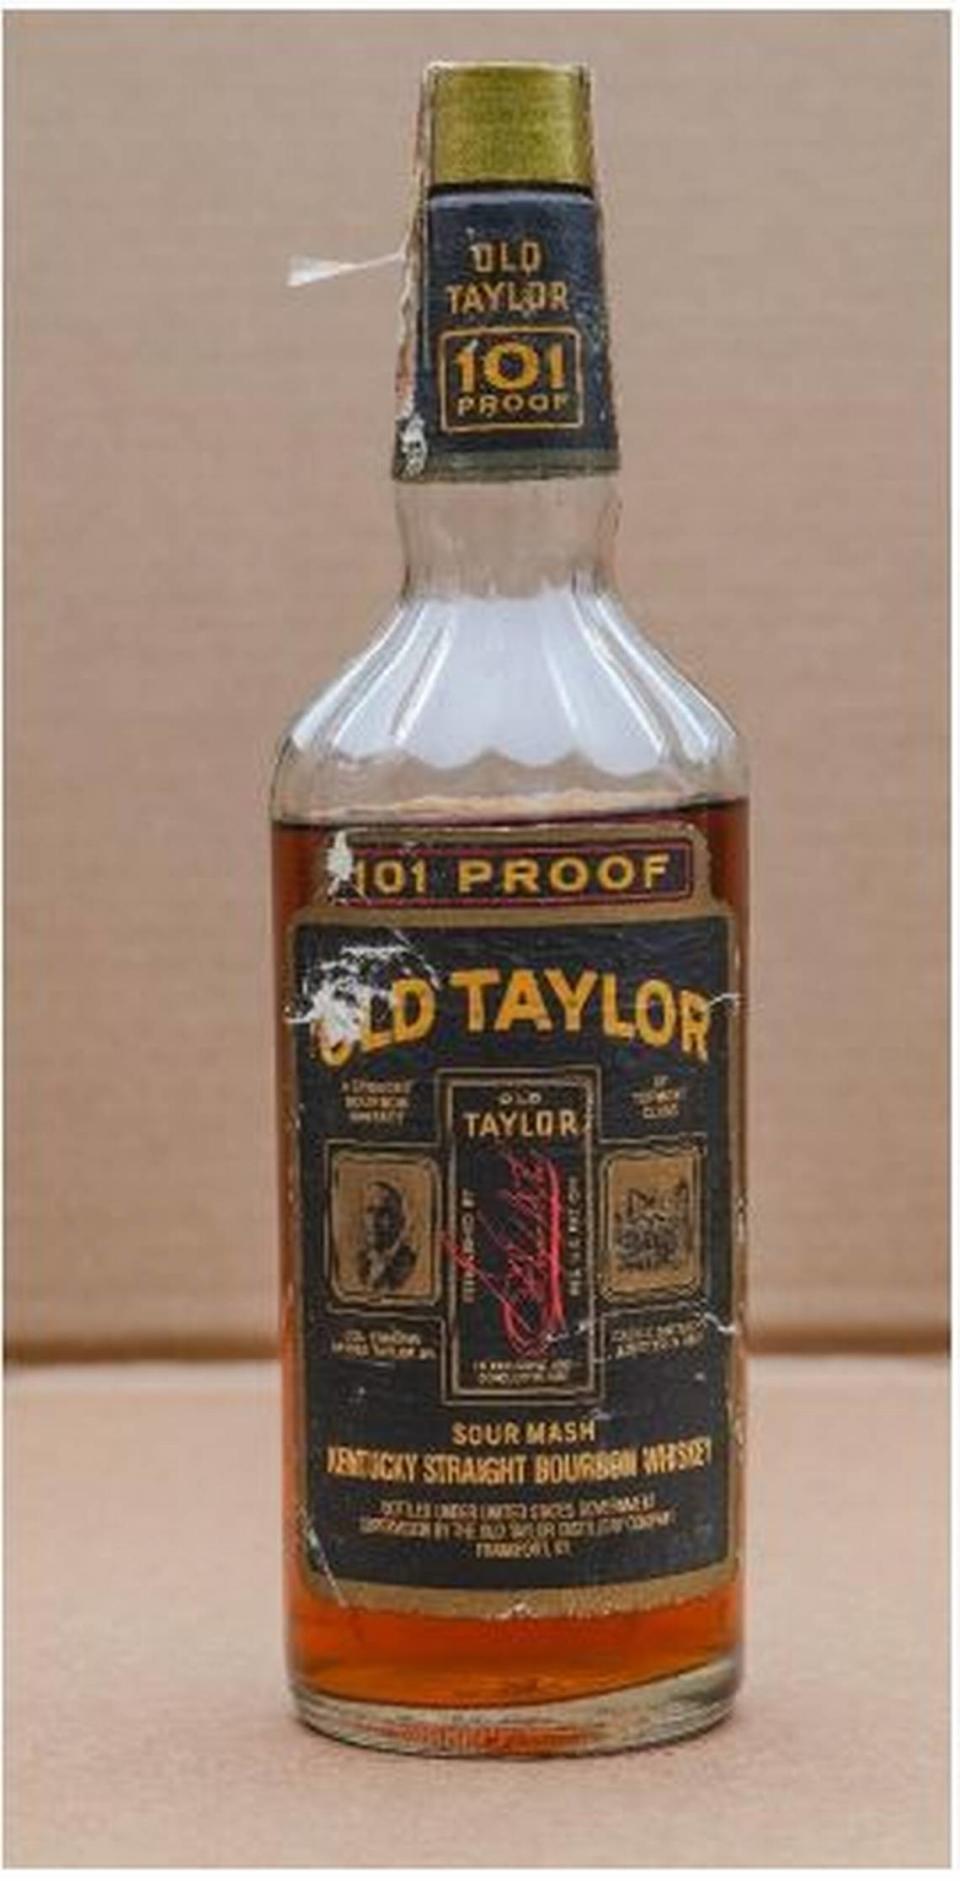 In a court filing in Franklin Circuit Court, Justins’ House of Bourbon alleged that “evaporation” seen in this extremely rare bottle of Old Taylor 101 occurred while it was in state custody. Kentucky Alcohol Beverage Control officials dispute that claim. Court filings